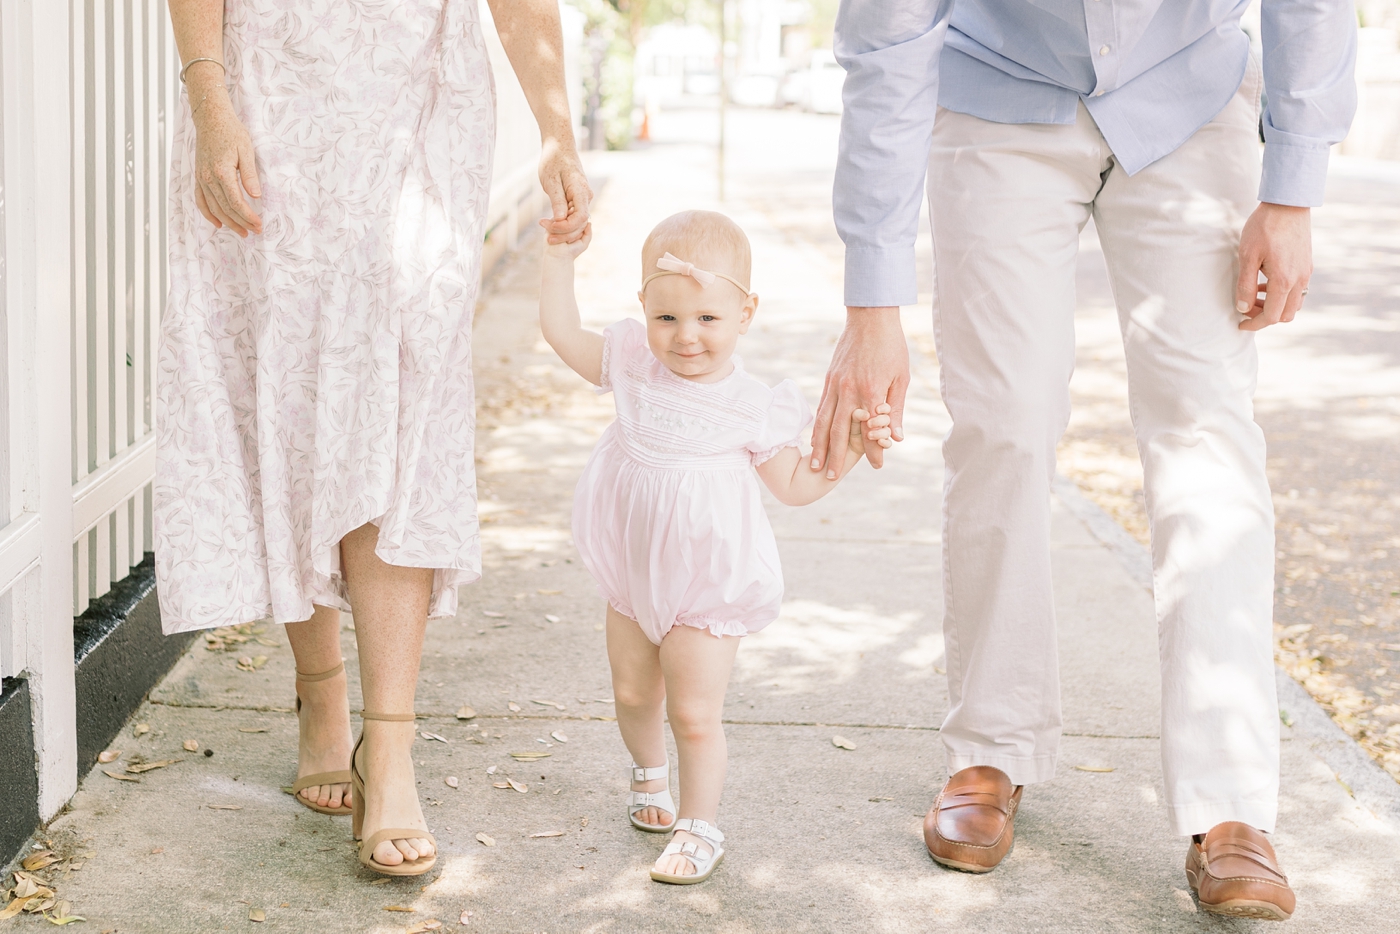 Mom and dad helping baby daughter walk down the sidewalk | Photo by Caitlyn Motycka Photography.